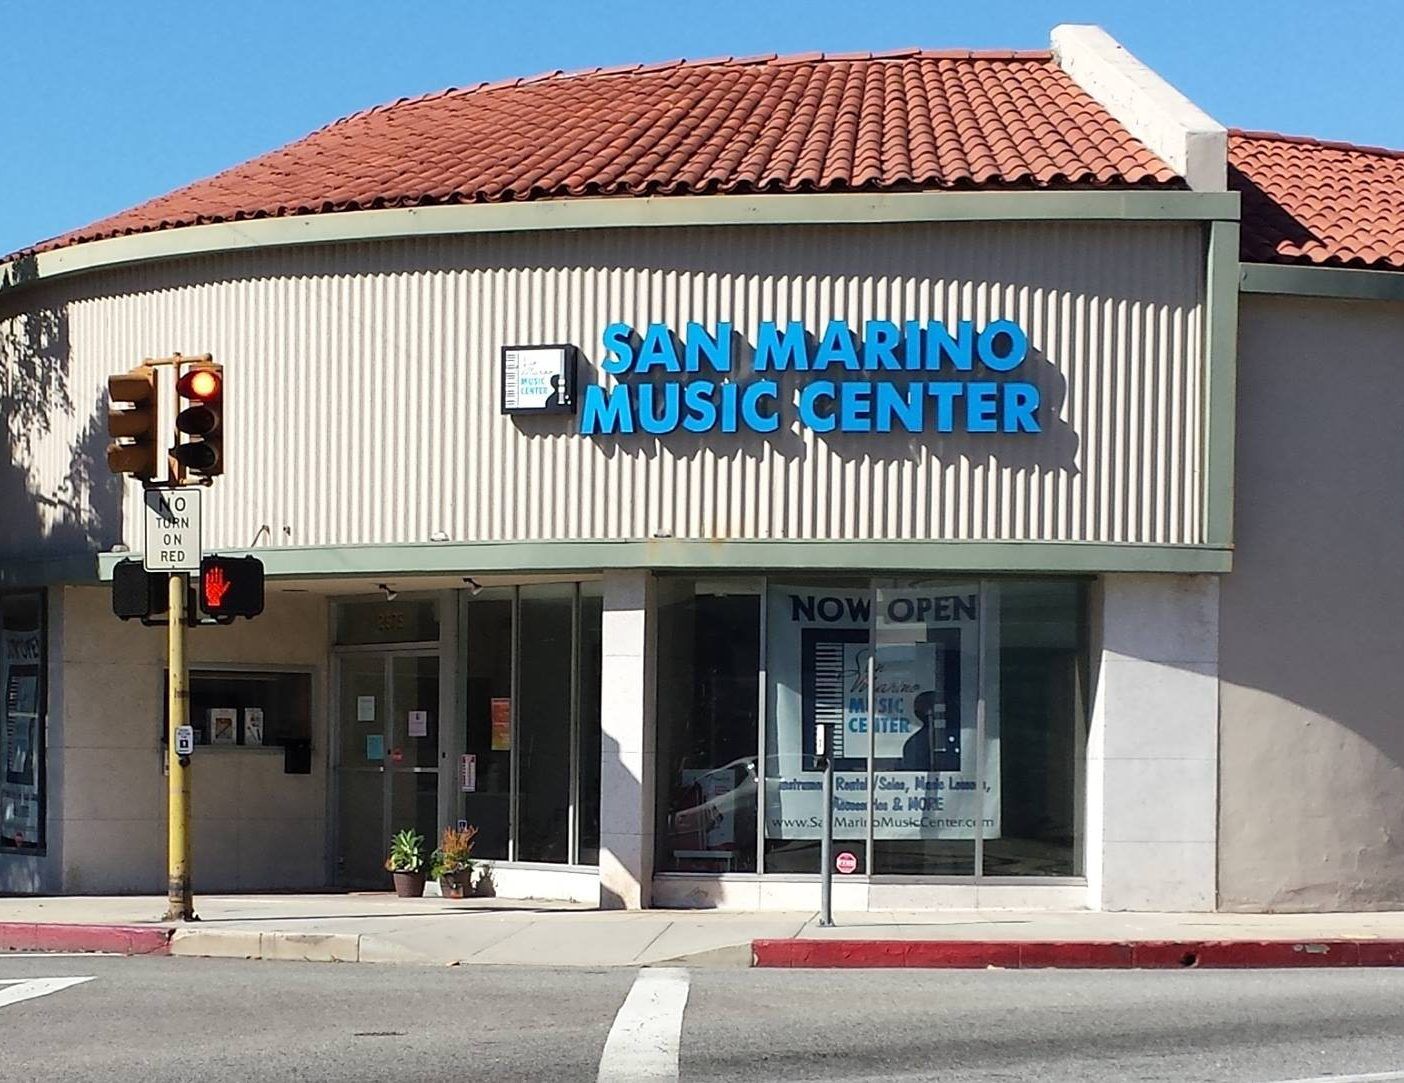 Street view of San Marino Music Center located at 2575 Mission St. 